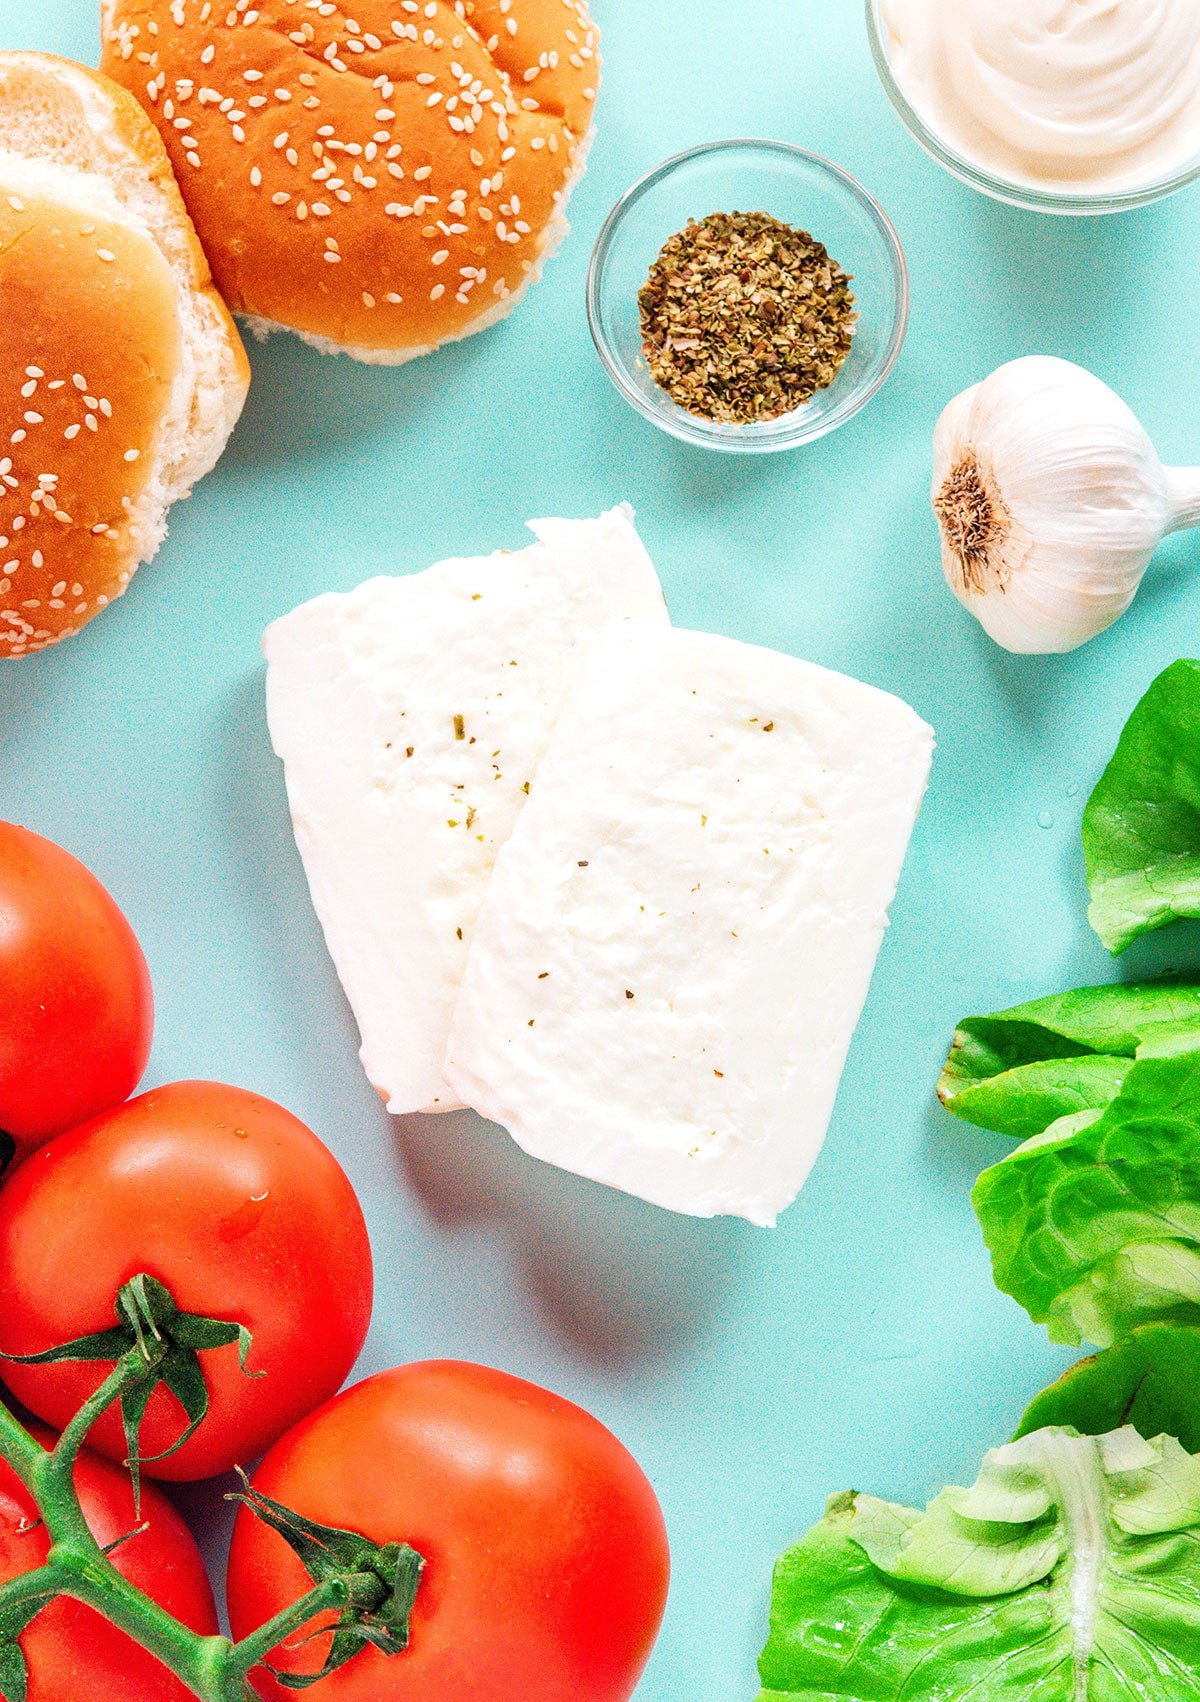 Ingredients for these burgers including halloumi cheese, lettuce, oregano, garlic, buns, tomato, mayo, and salt and pepper.